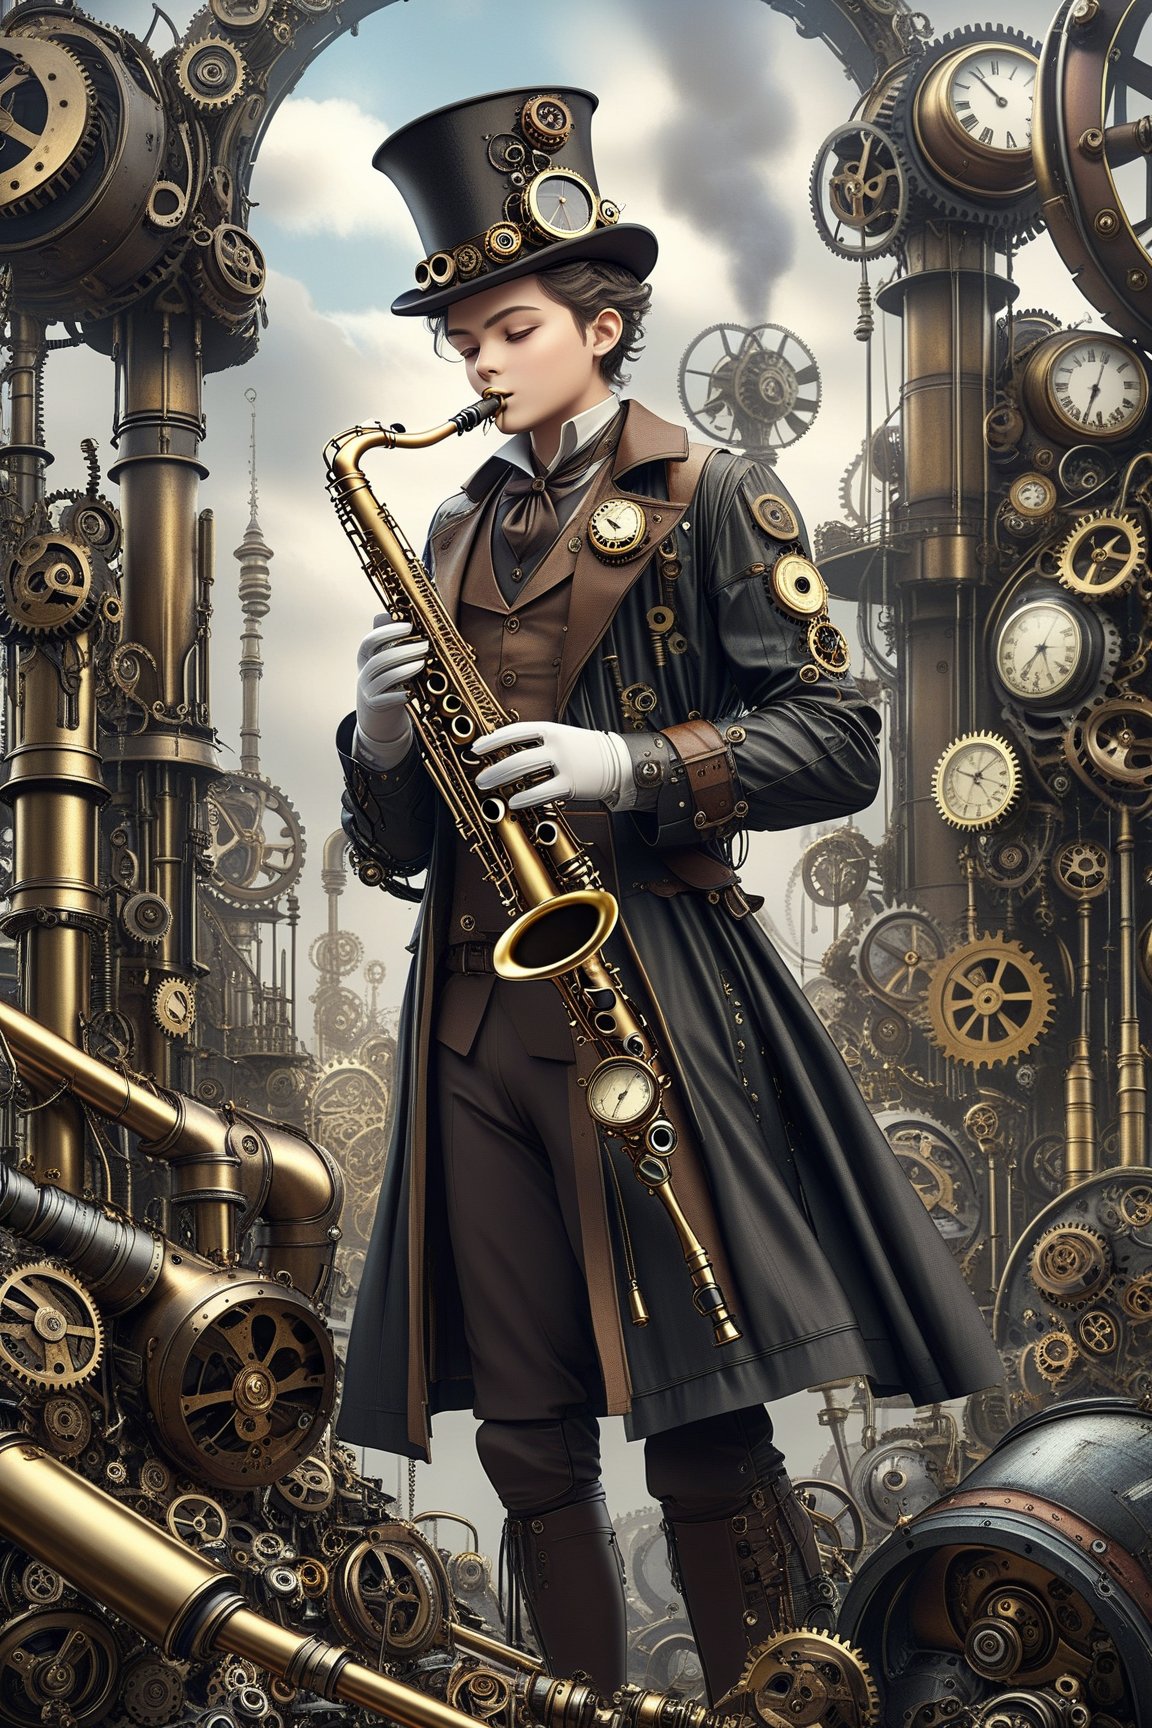 create a beautiful magical steampunk fantasy scene where you can evidence a clarinet,.Mechanical,DonMSt34mPXL